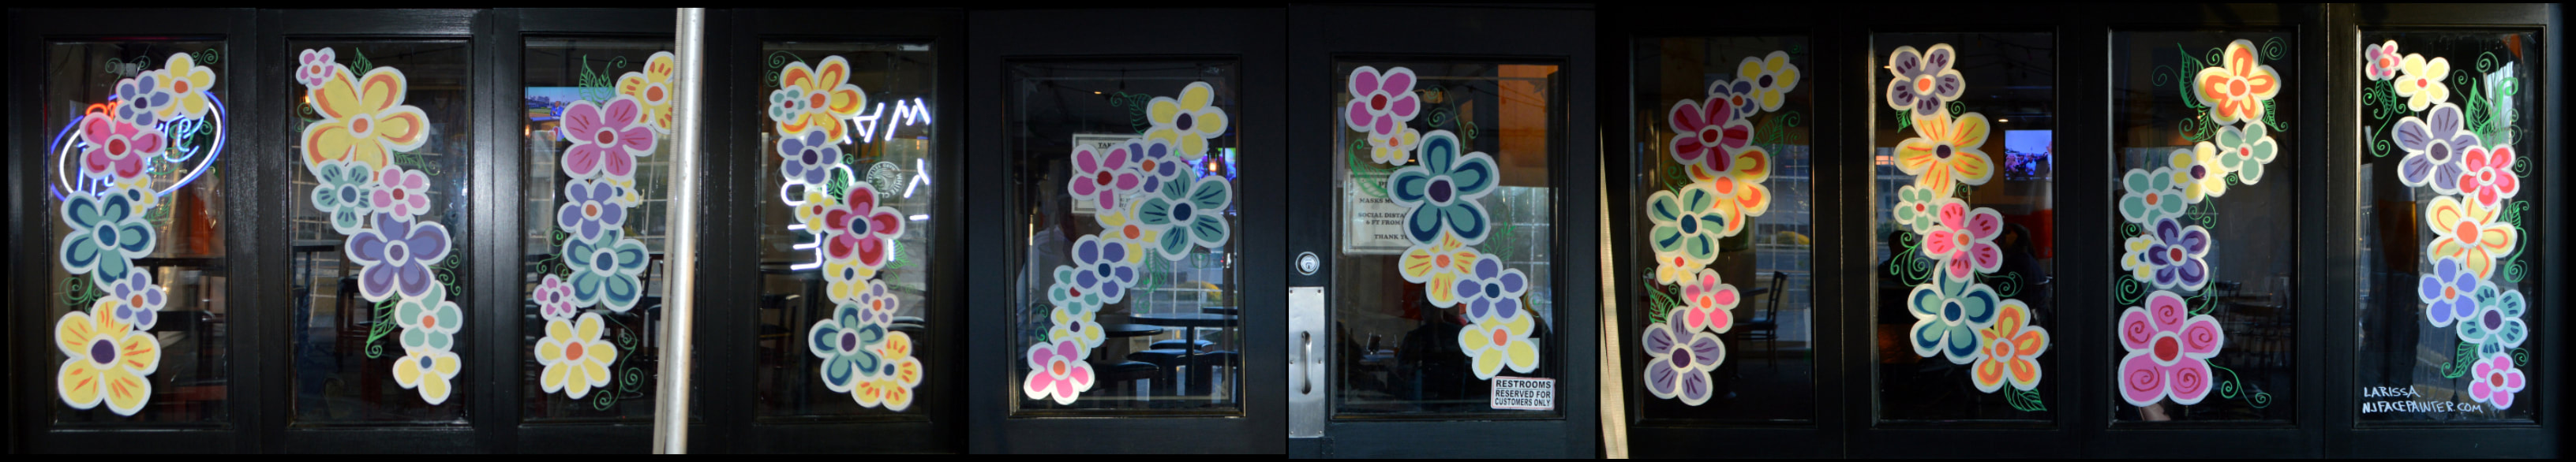 Spring Window Painting at The Copper Still in Pomona, Rockland County, NY